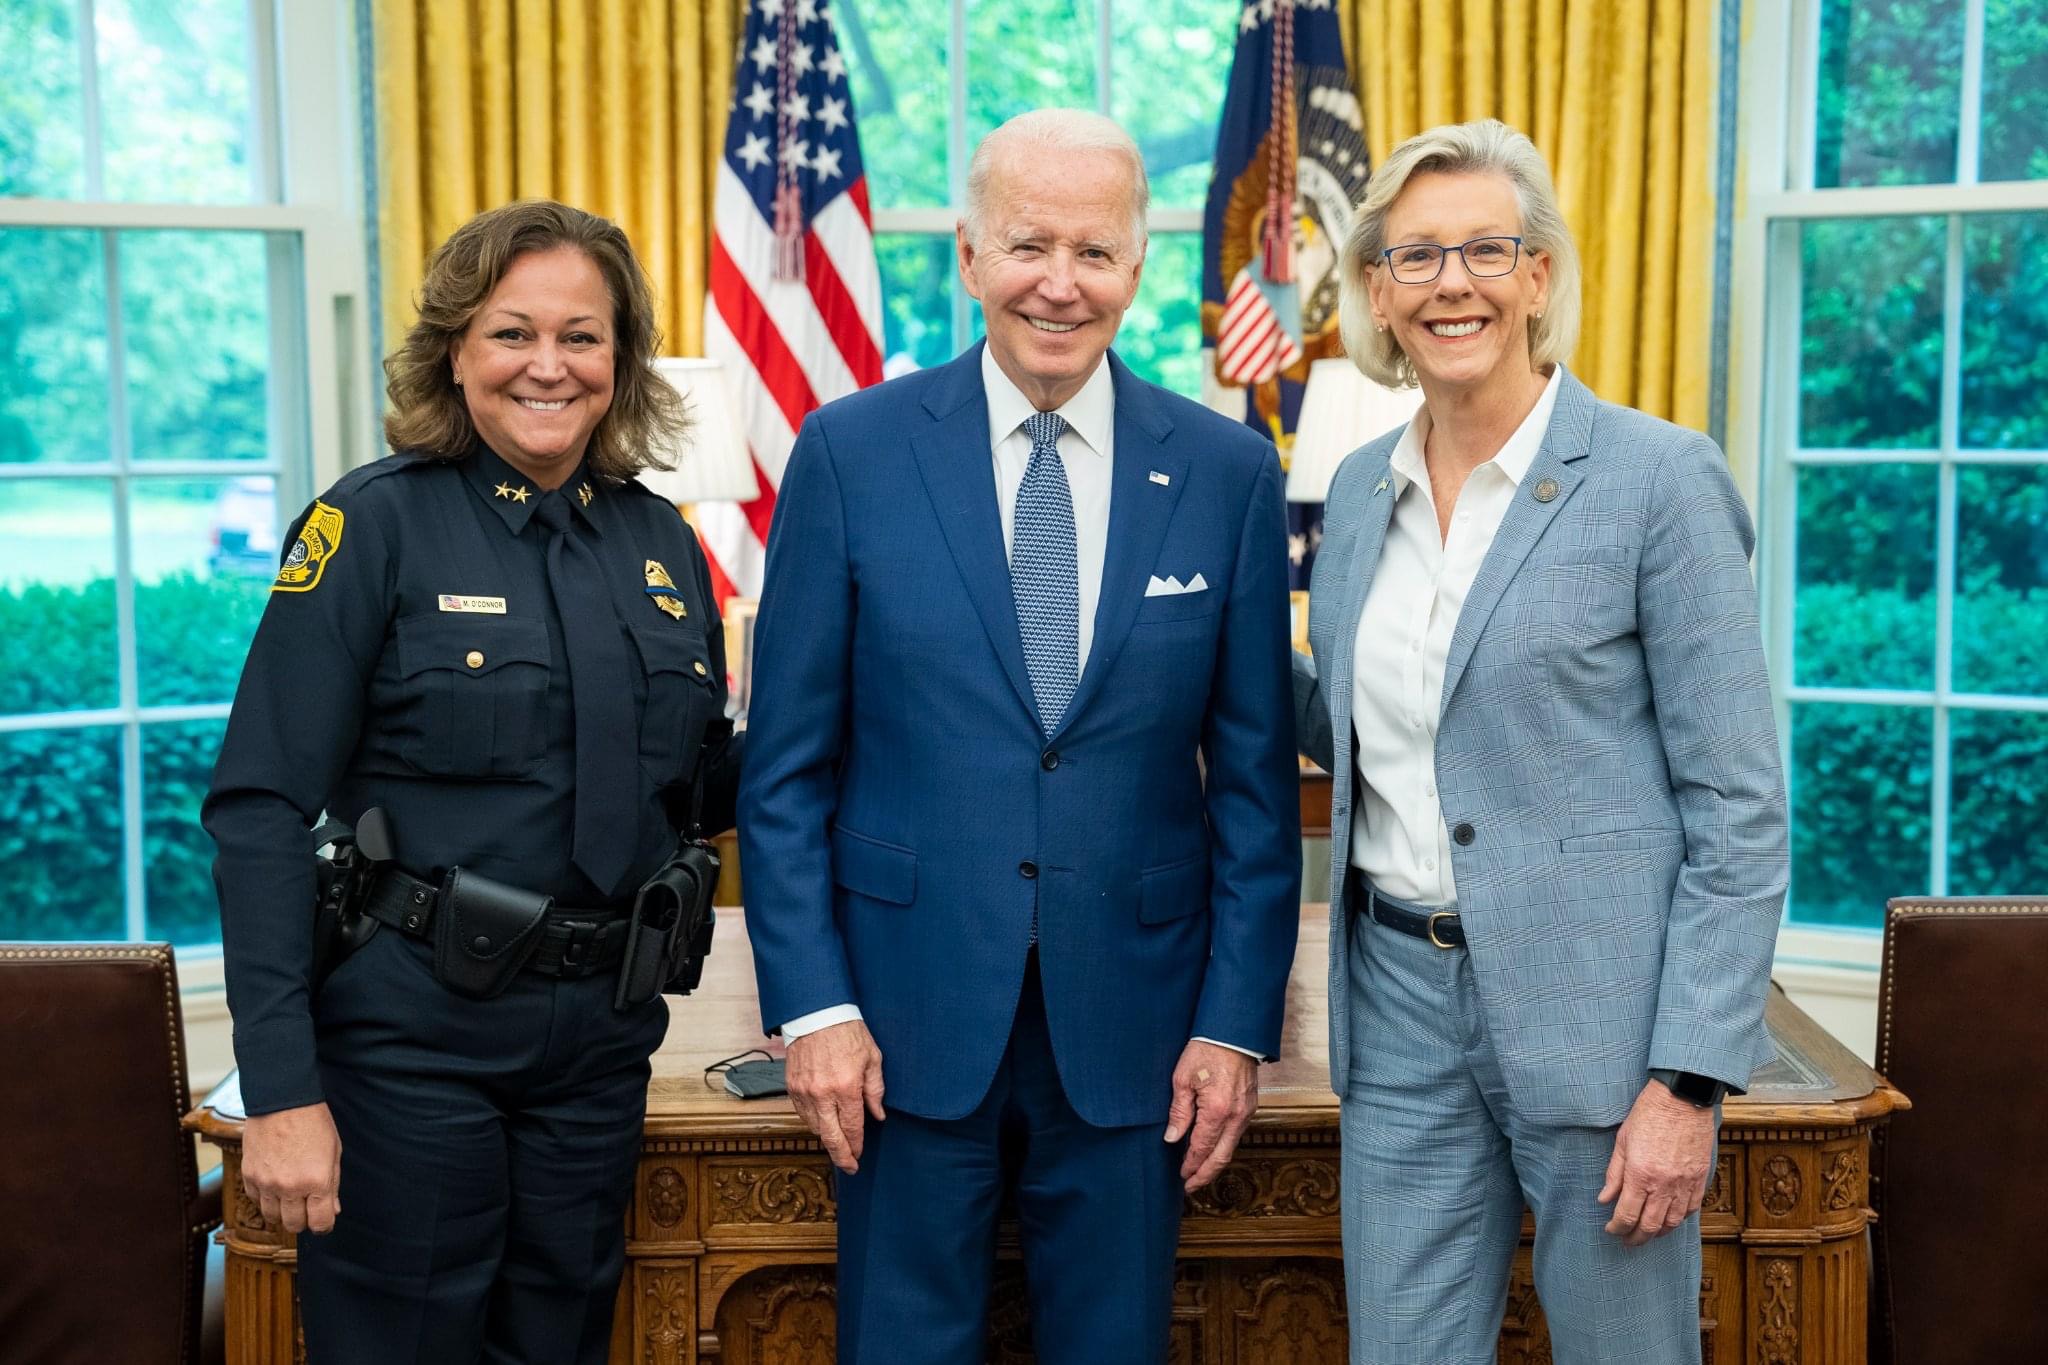 Mayor Jane Castor and Tampa Police Chief Mary O'Connor met with President Joe Biden